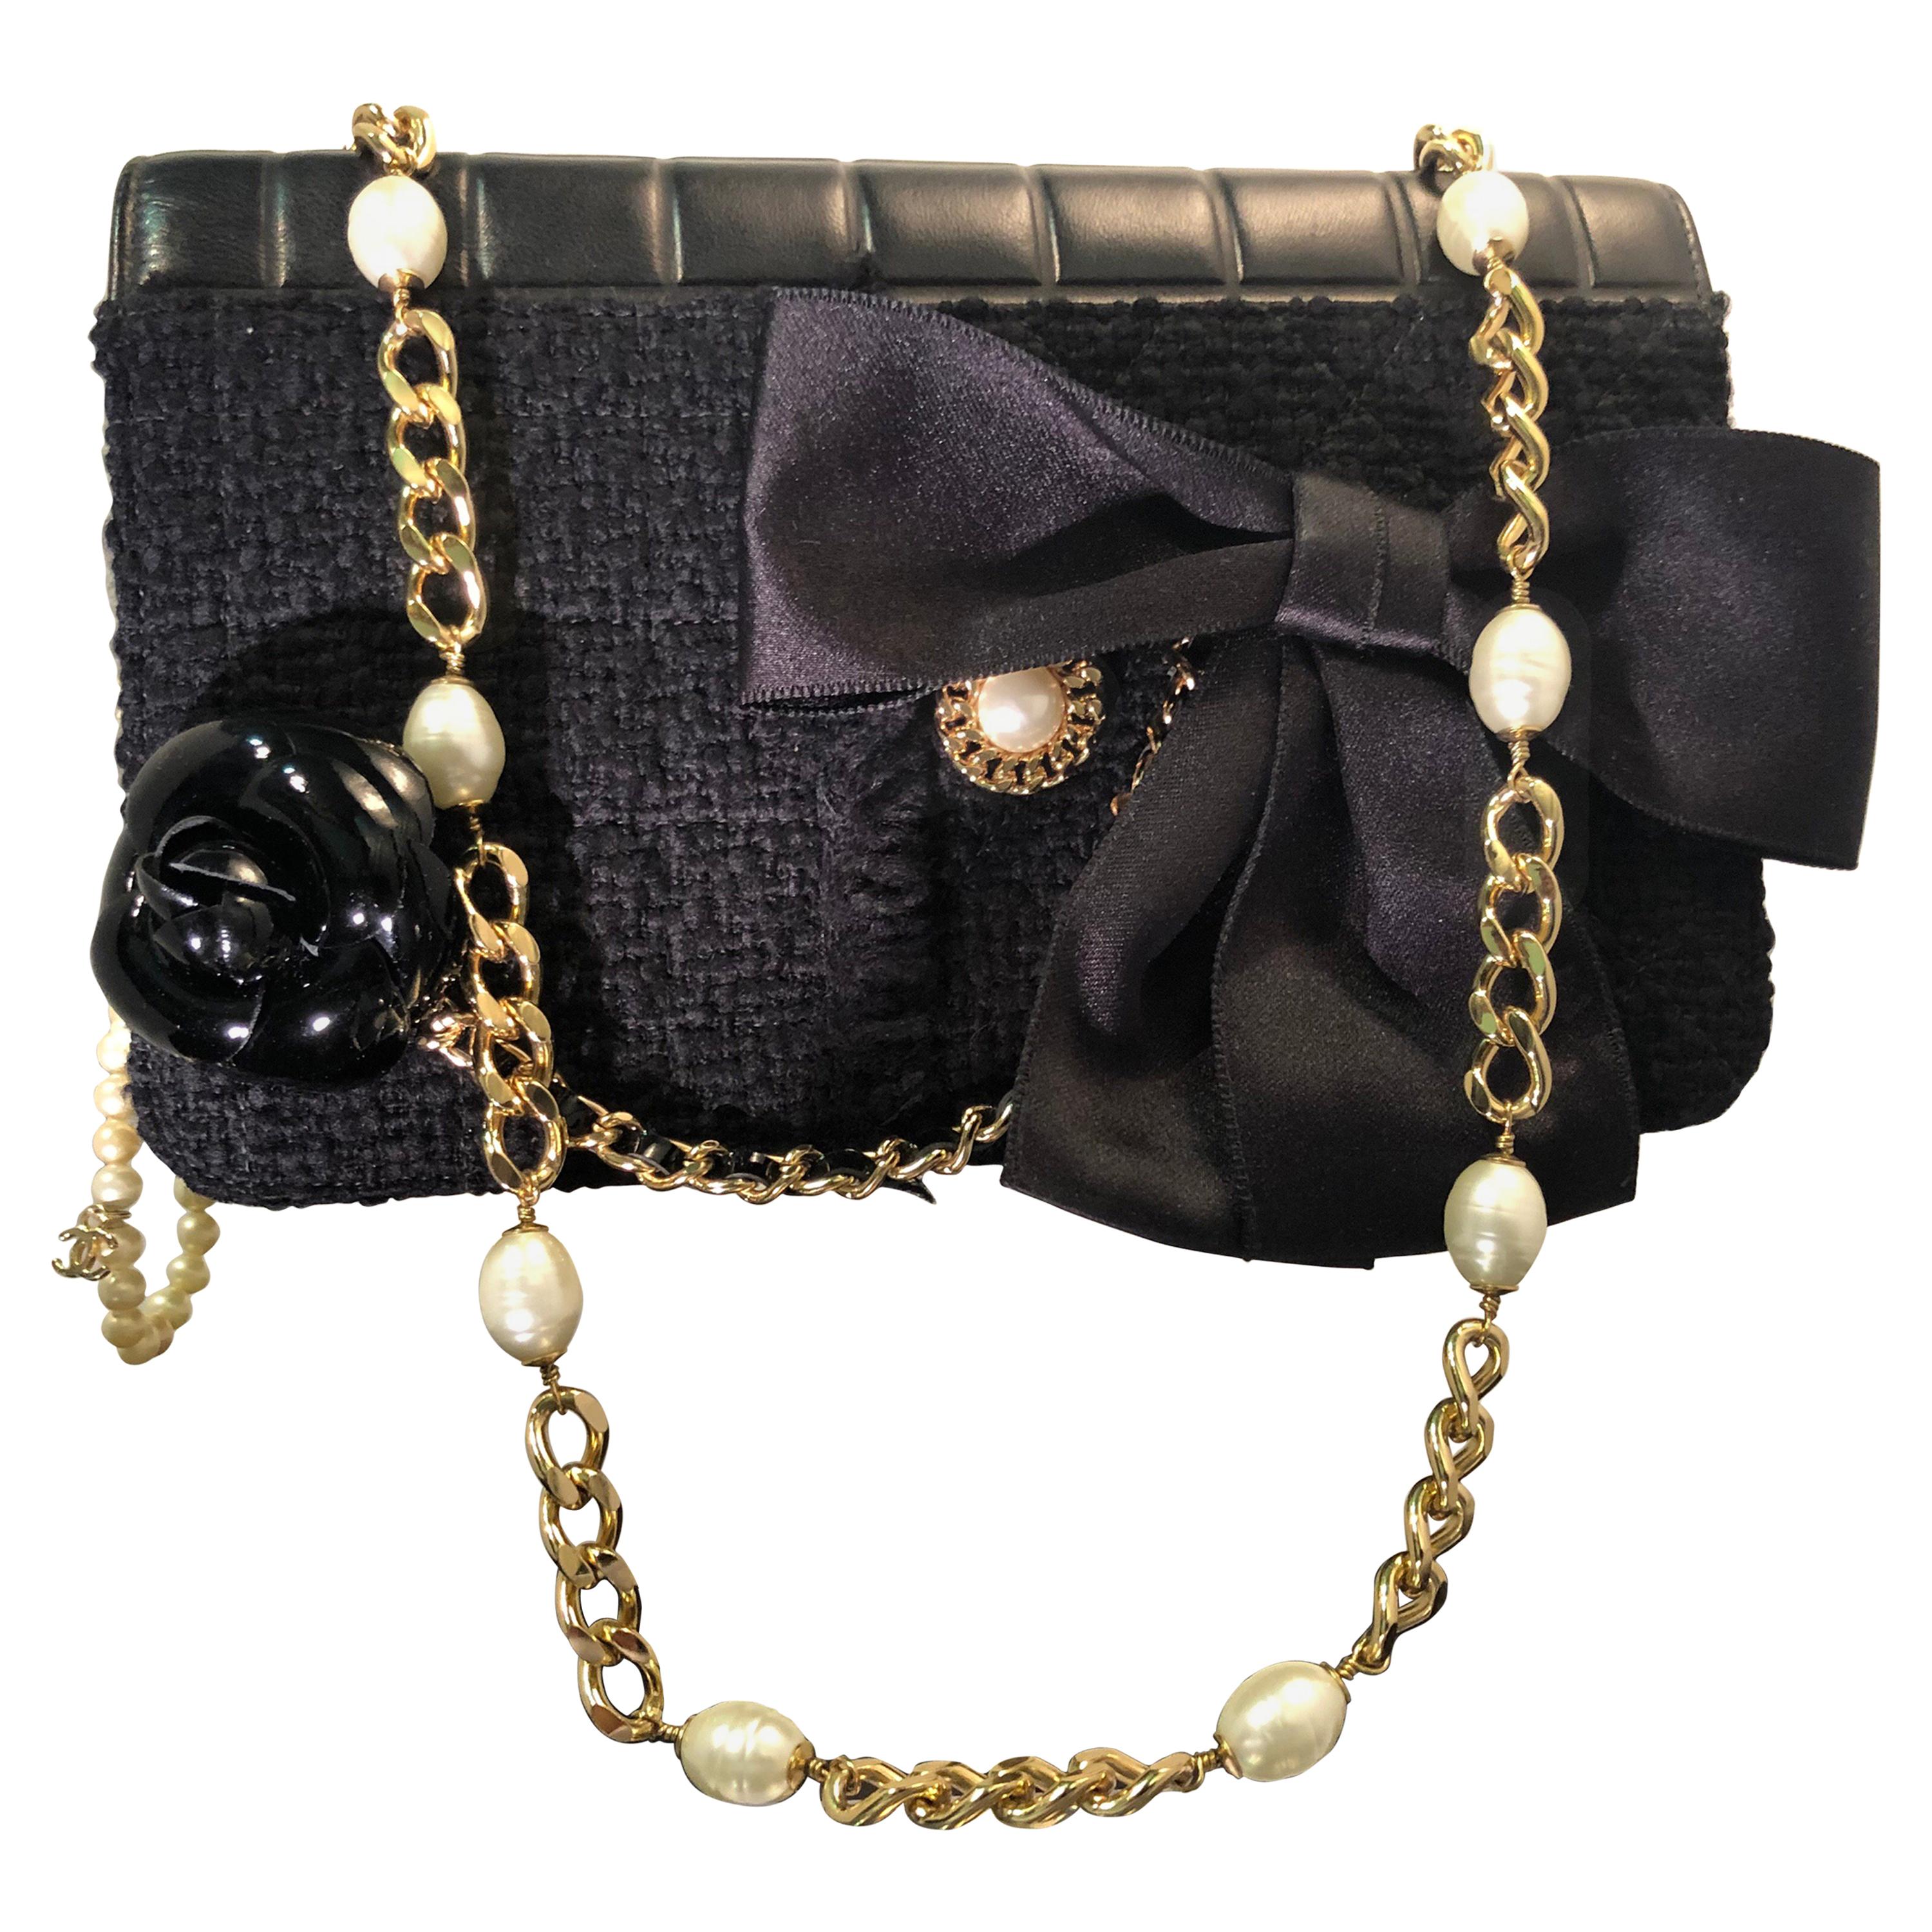 Chanel Black Boucle / Kid Leather Handbag with Camellia and CC Pearls